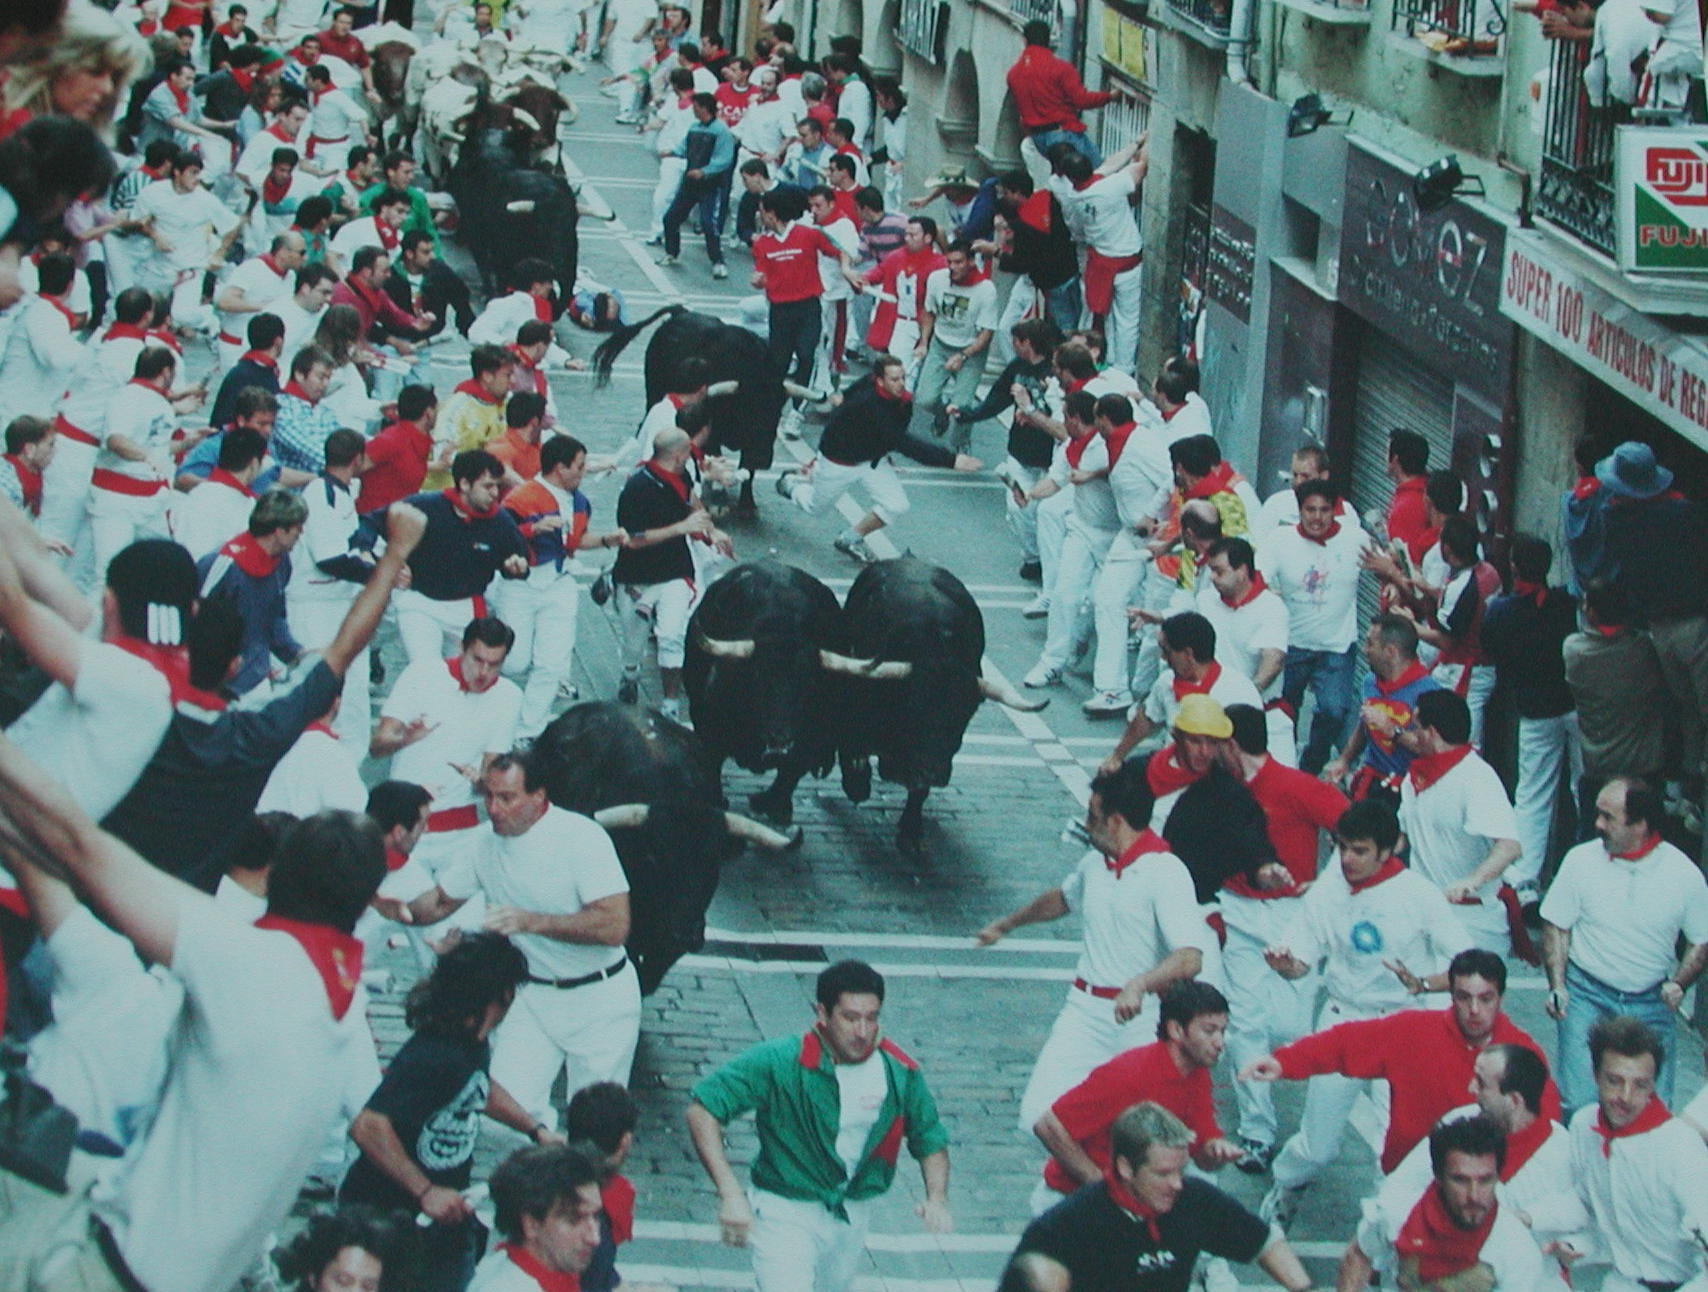 Running with the Bulls in Pamplona, Spain 2001